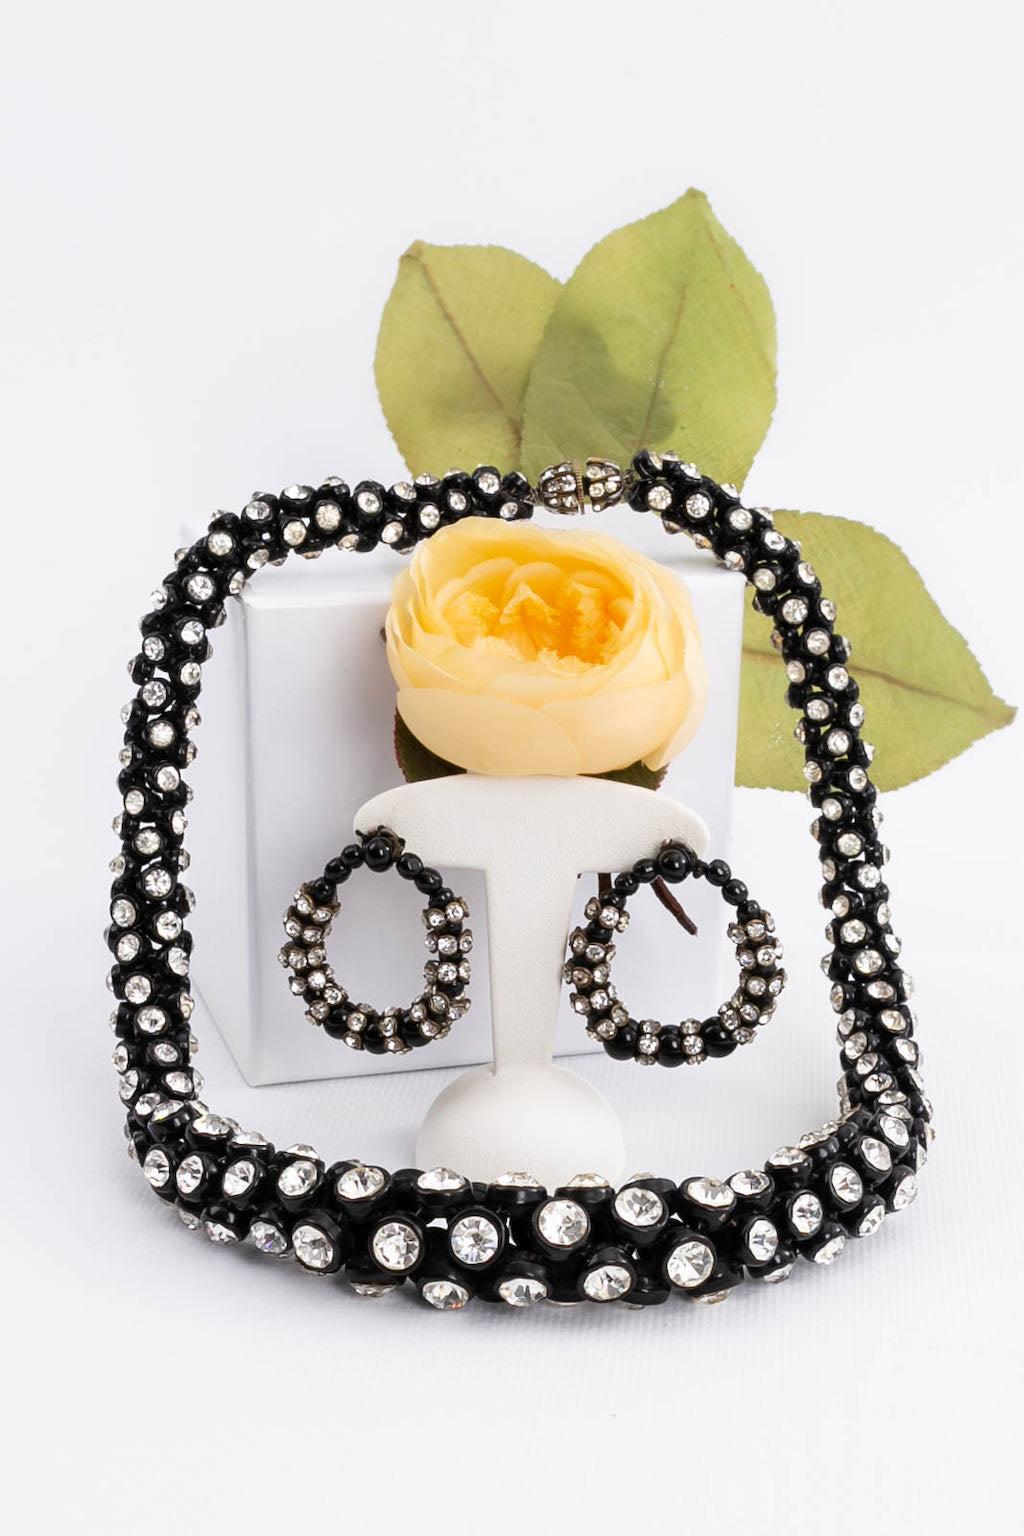 (Made in France) Set comprised of an articulated necklace and matching earrings, in black lacquered metal and rhinestones. Solid silver clasp. No signature. Circa1930s.

Additional information:
Condition: Very good condition
Dimensions: Necklace